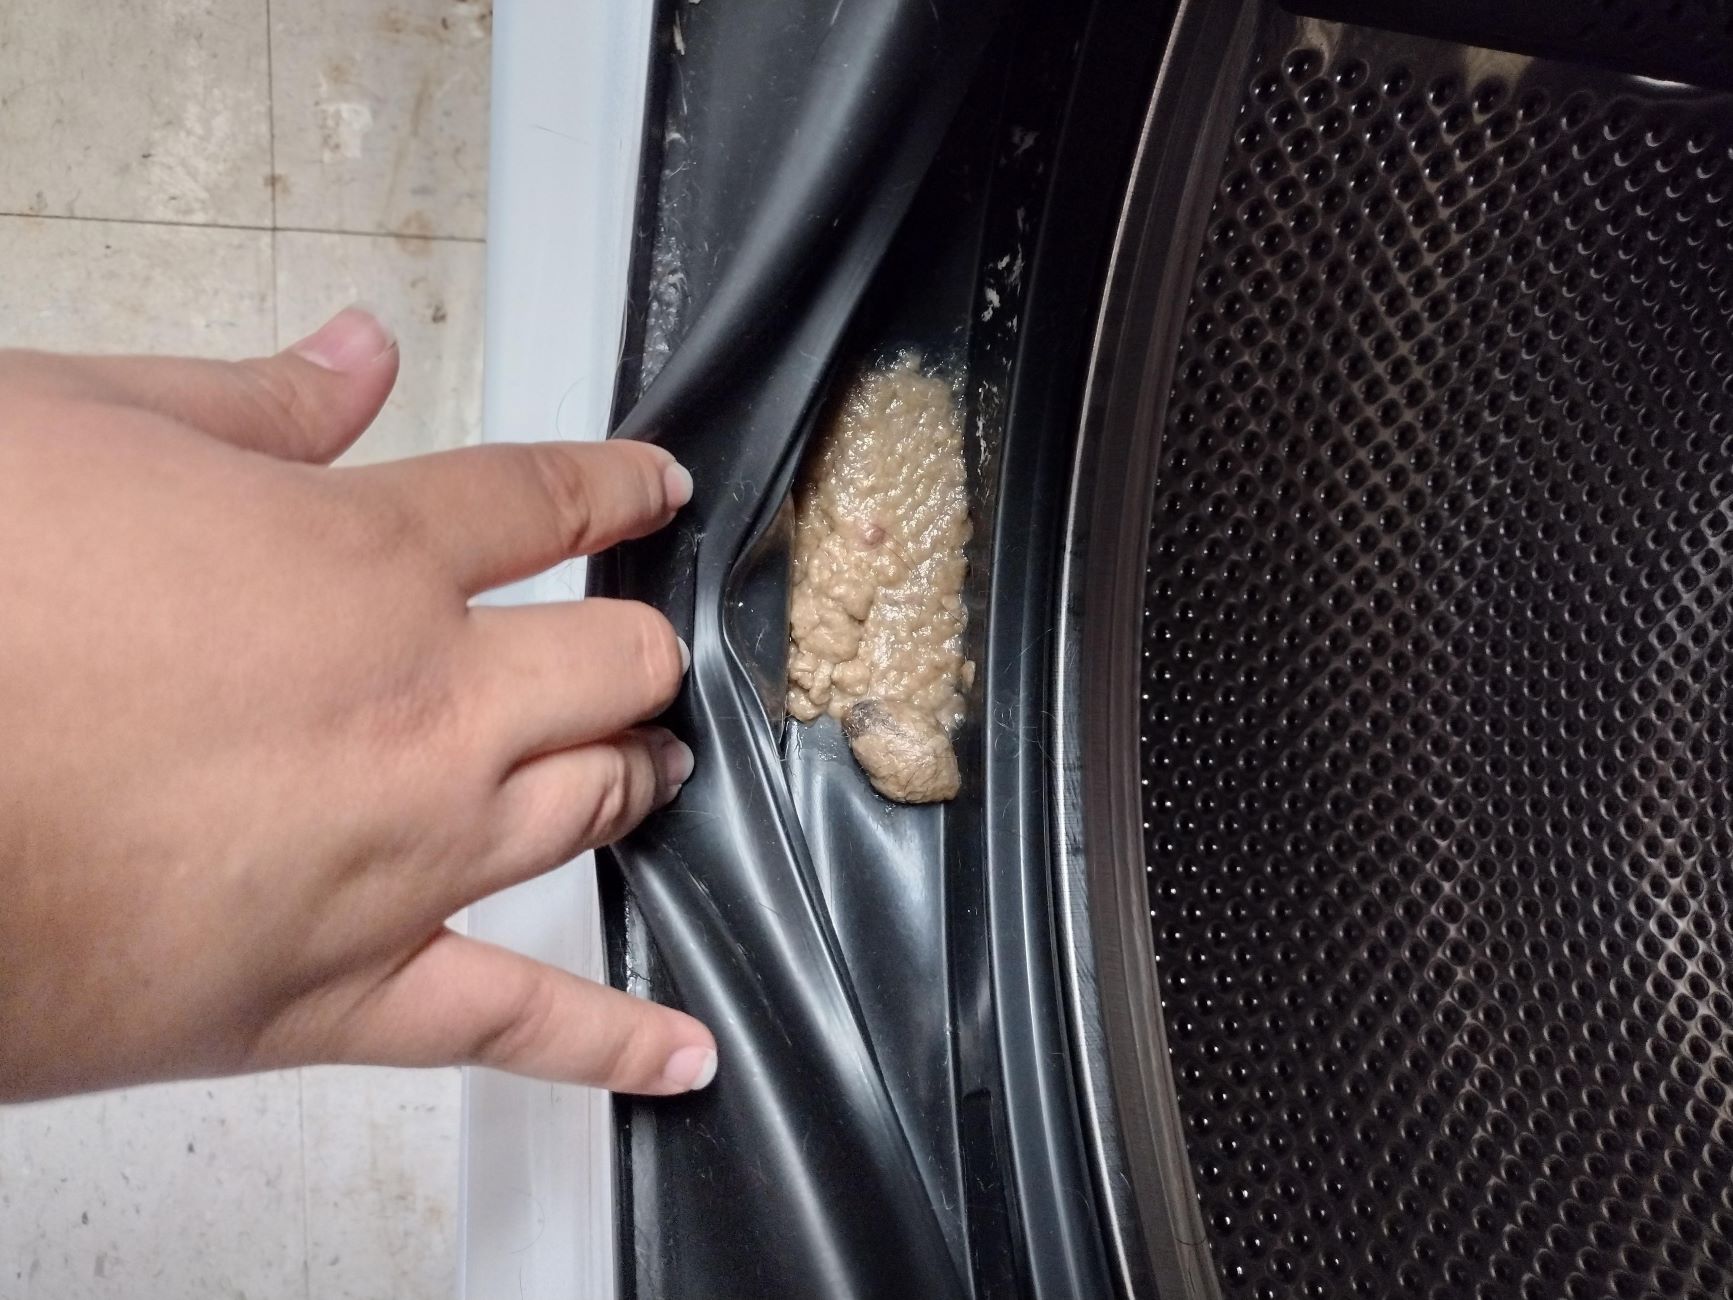 How To Clean Poop In A Washing Machine